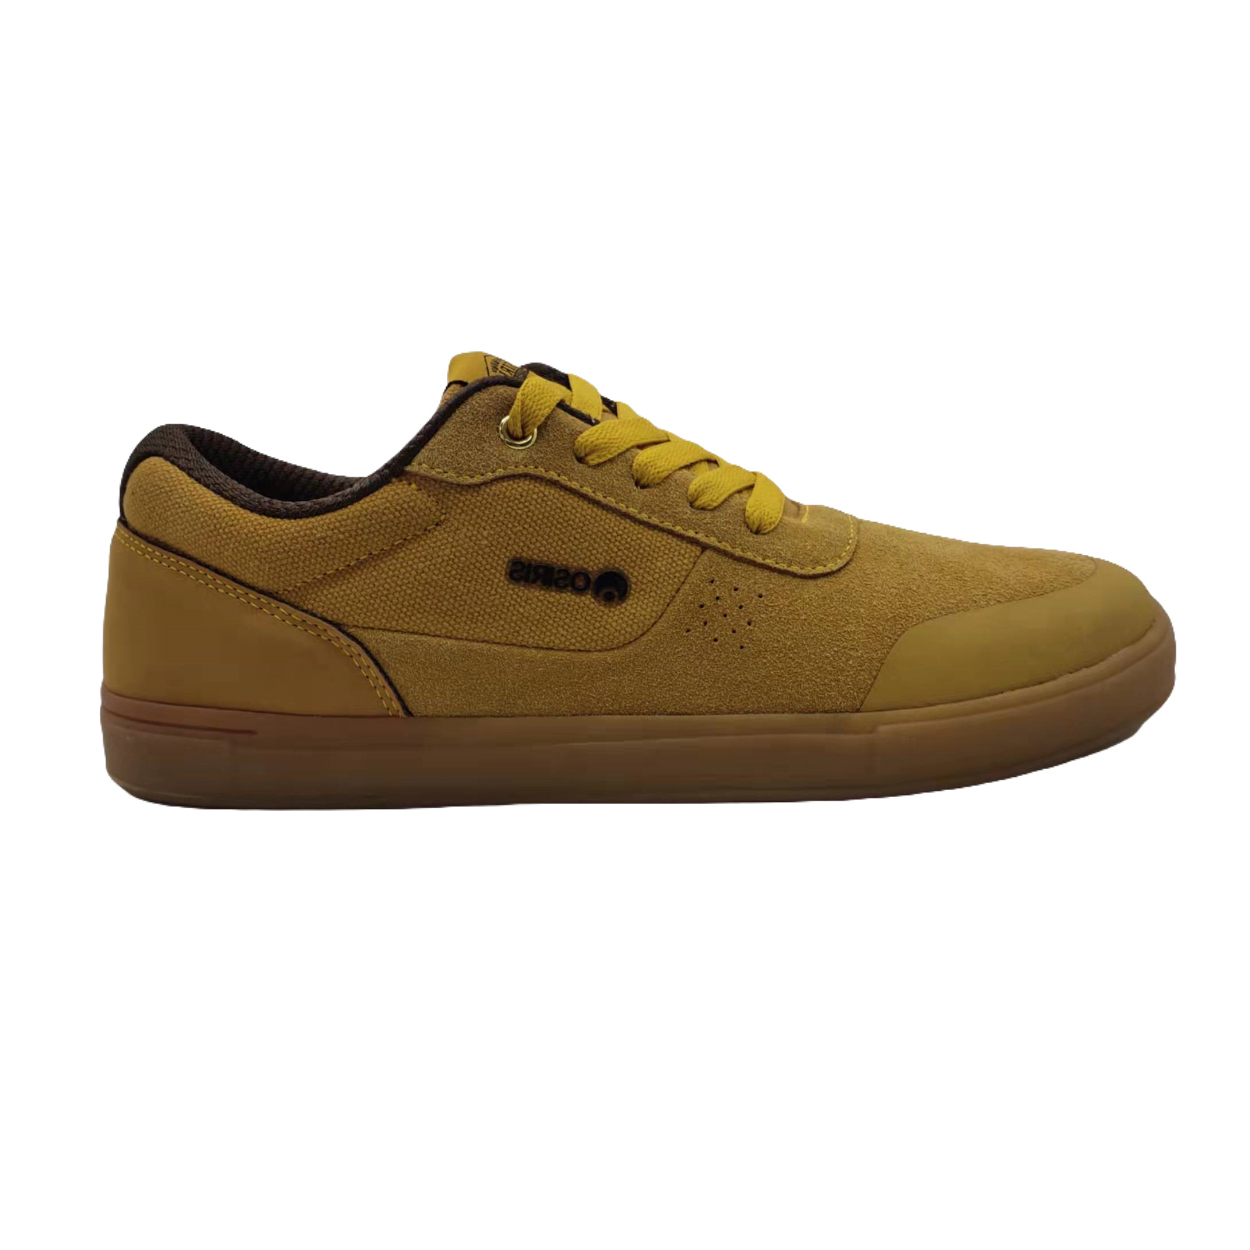 Suede & Oxford Fabric Upper Board Shoes With Tpr Outsole In Retro Look Featured Image